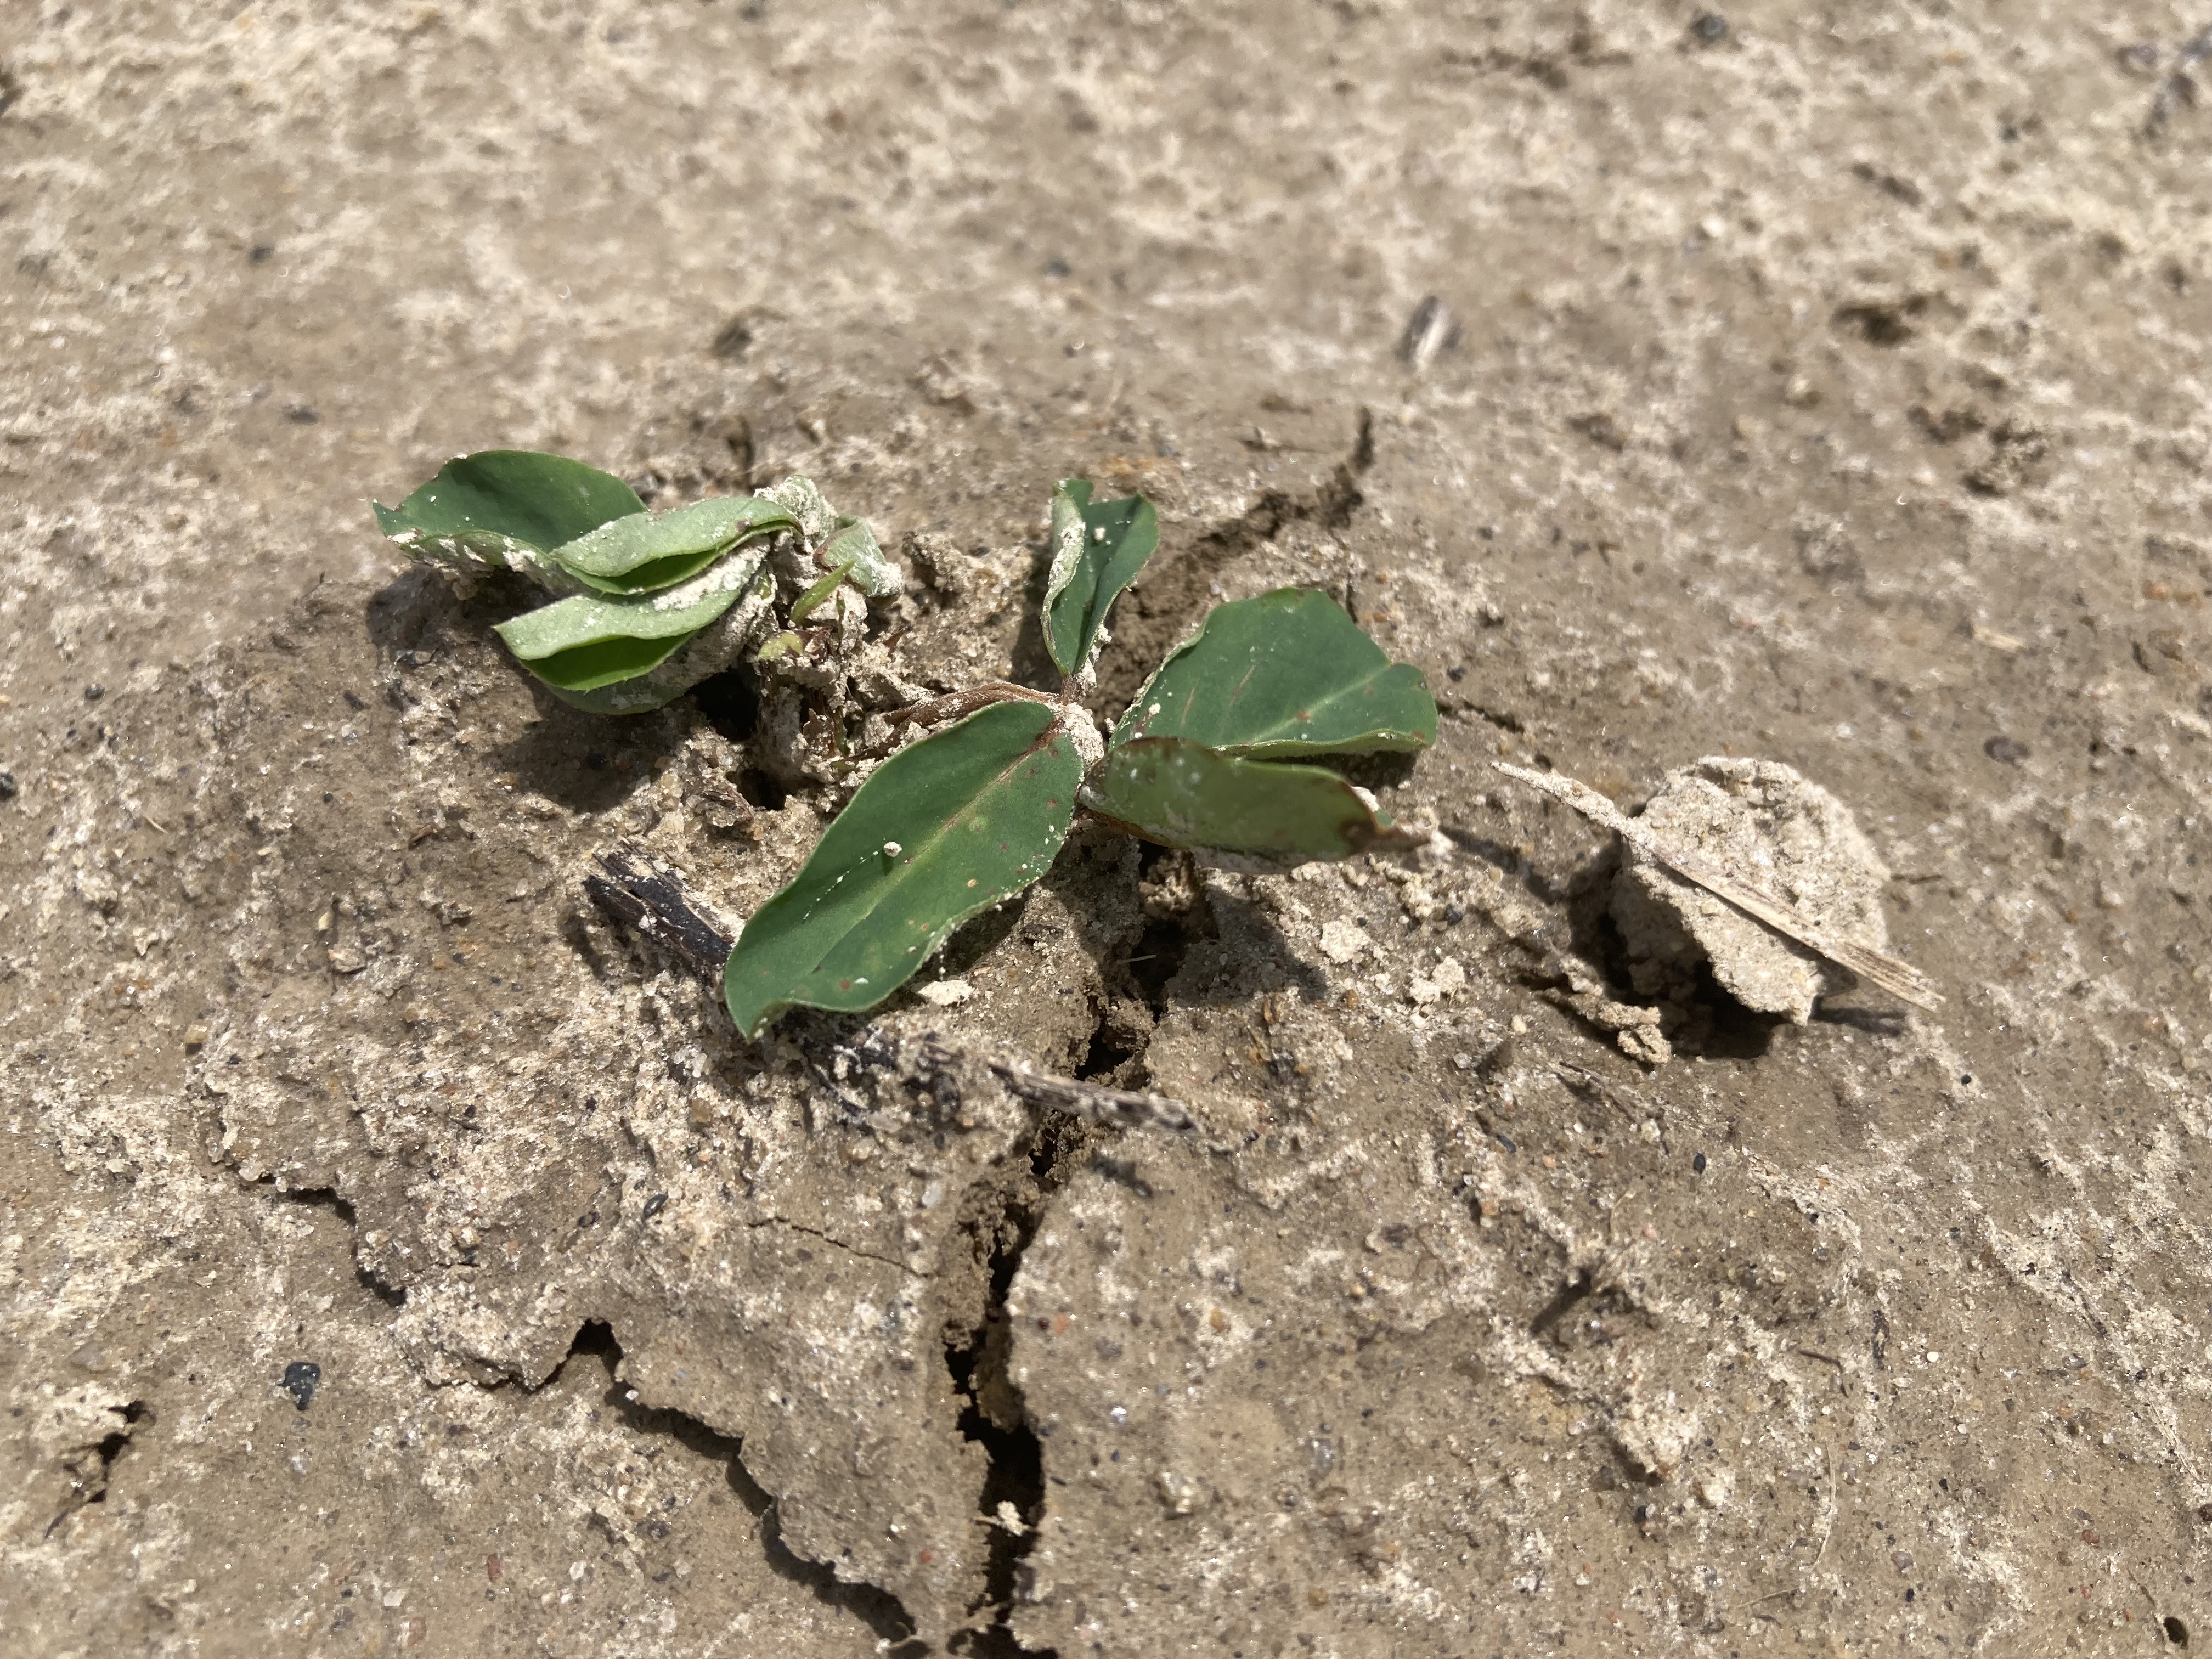 A peanut plant laying on the ground.